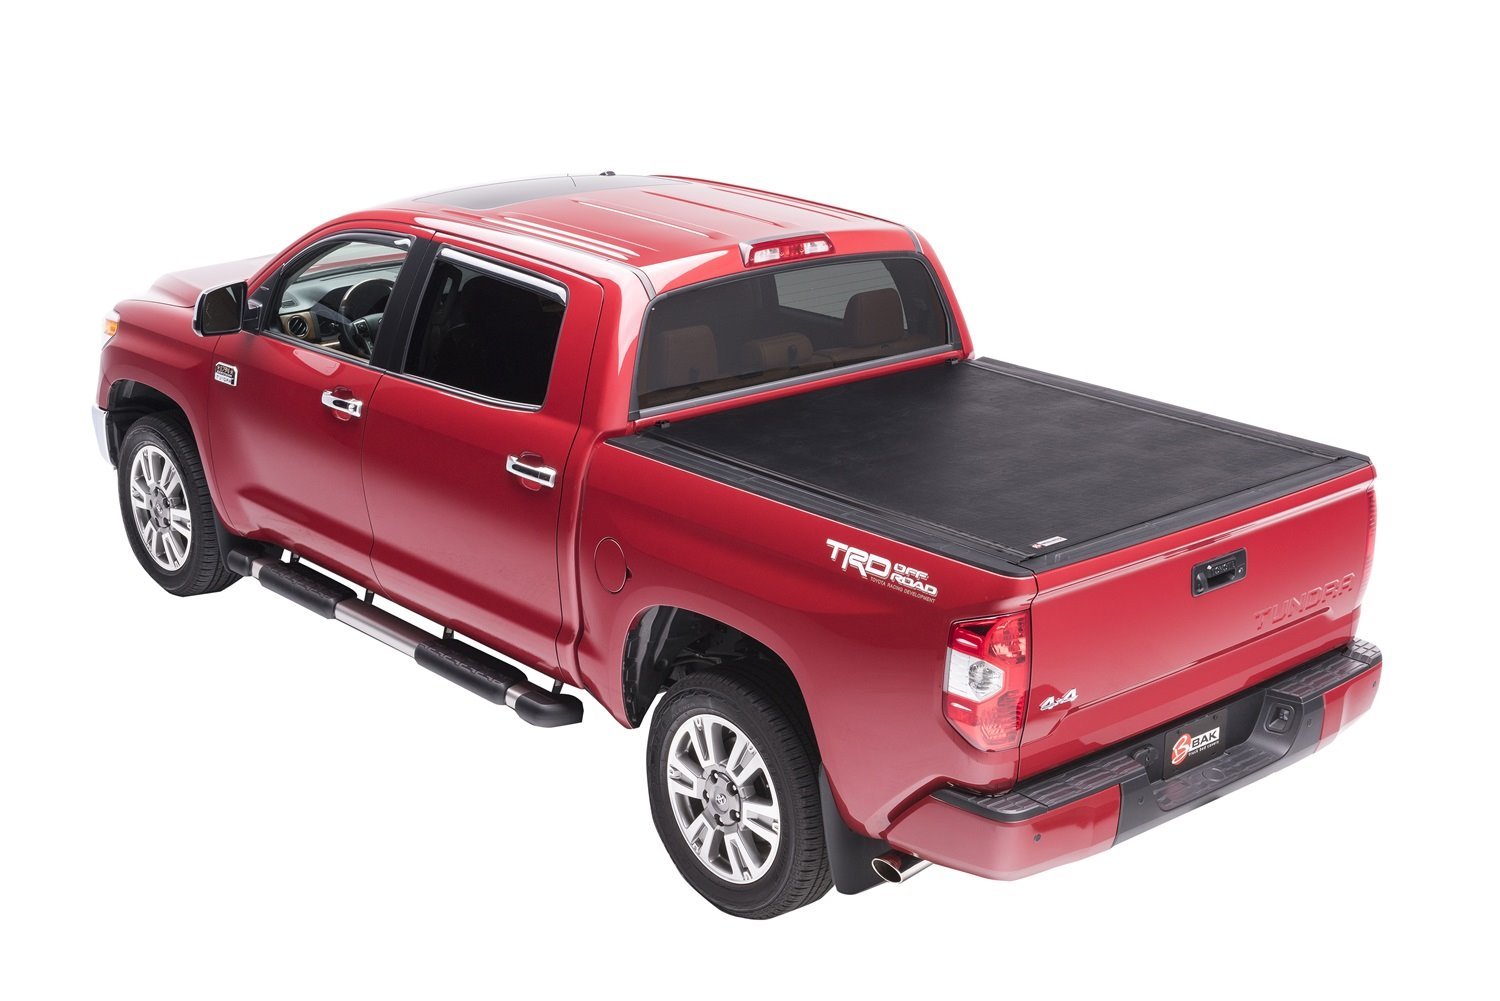 39440 Revolver X2 for Fits Select Toyota Tundra 5.6 ft. Bed, Roll-Up Hard Cover Style [Black Finish]